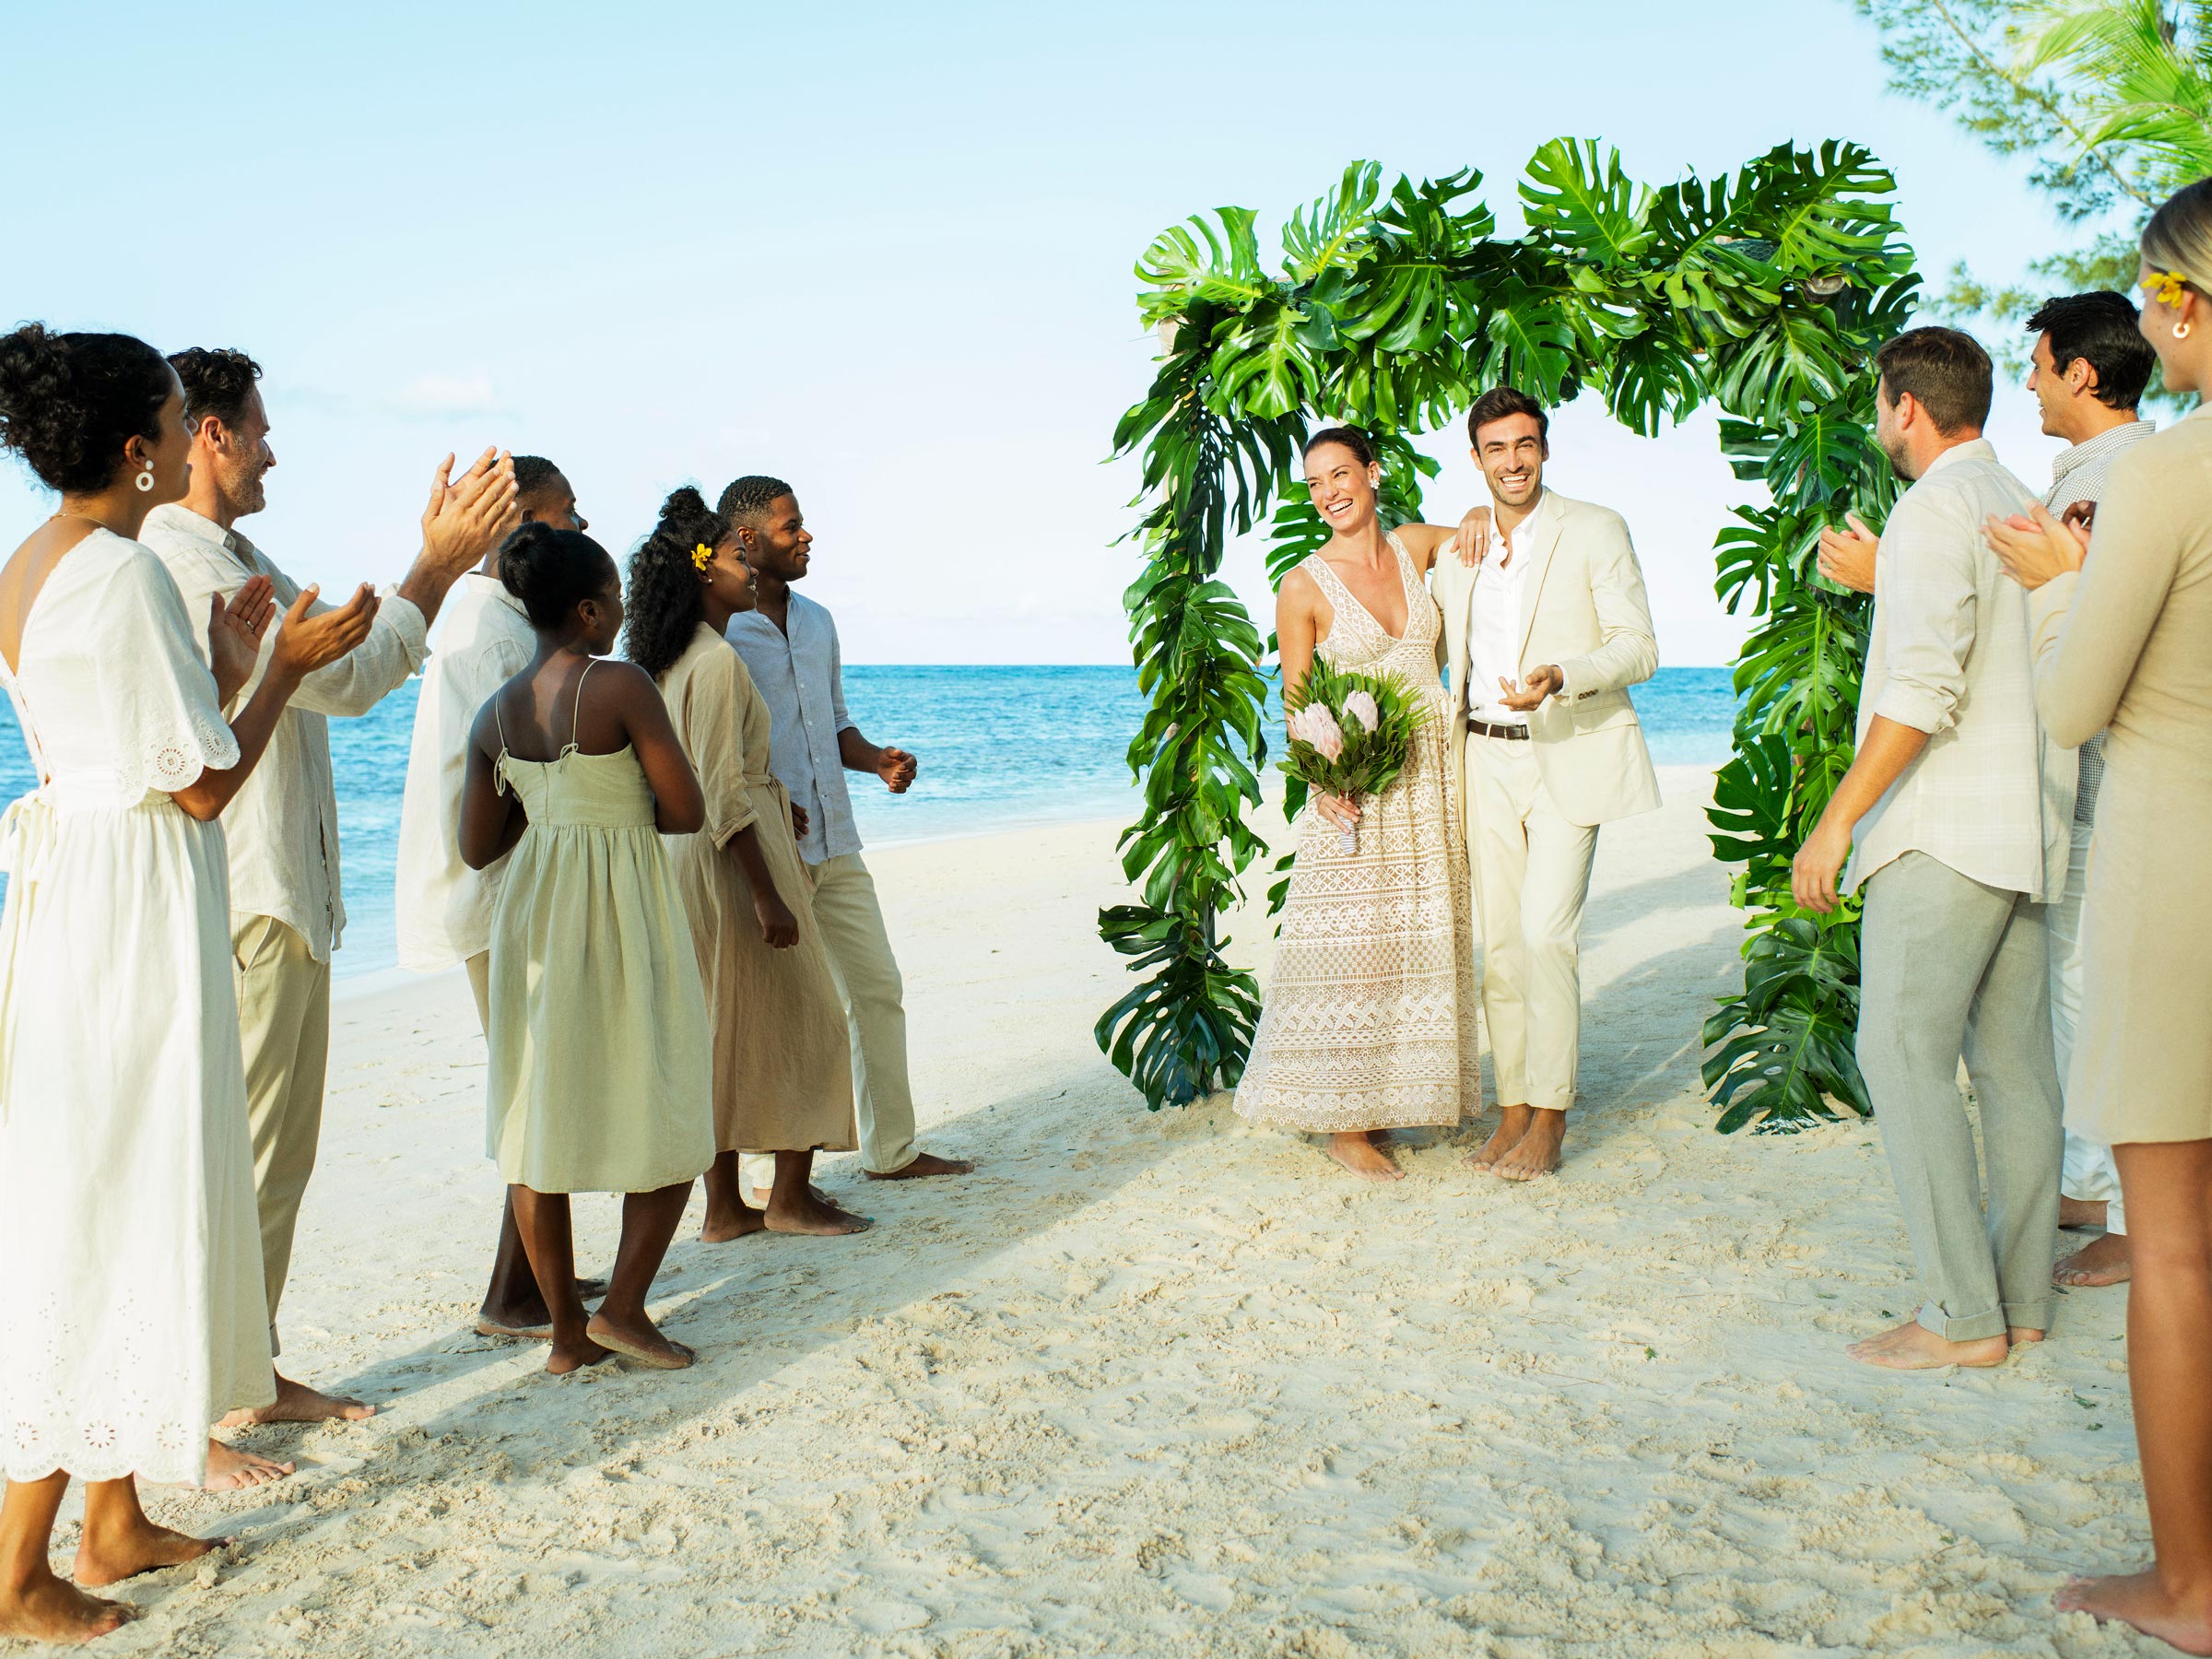 Excellence Oyster Bay the Best Resort to Renew Your Wedding Vows